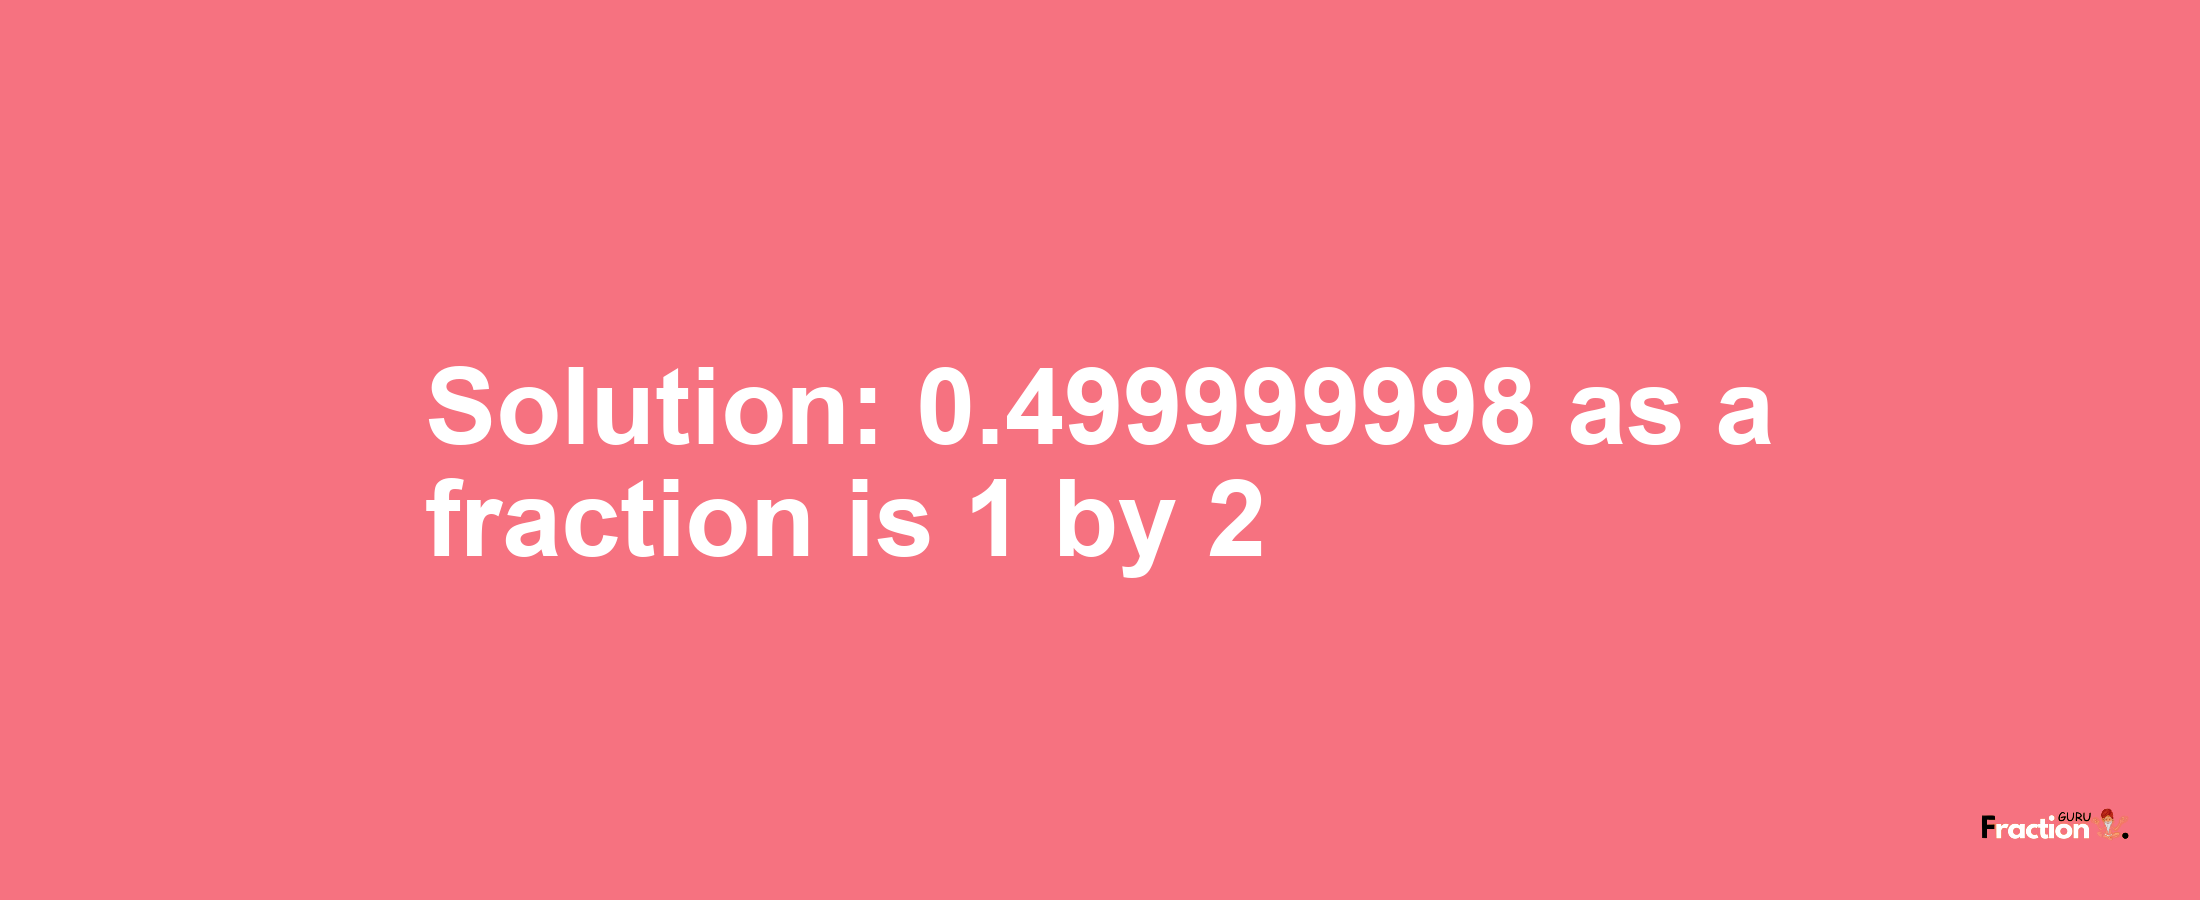 Solution:0.499999998 as a fraction is 1/2